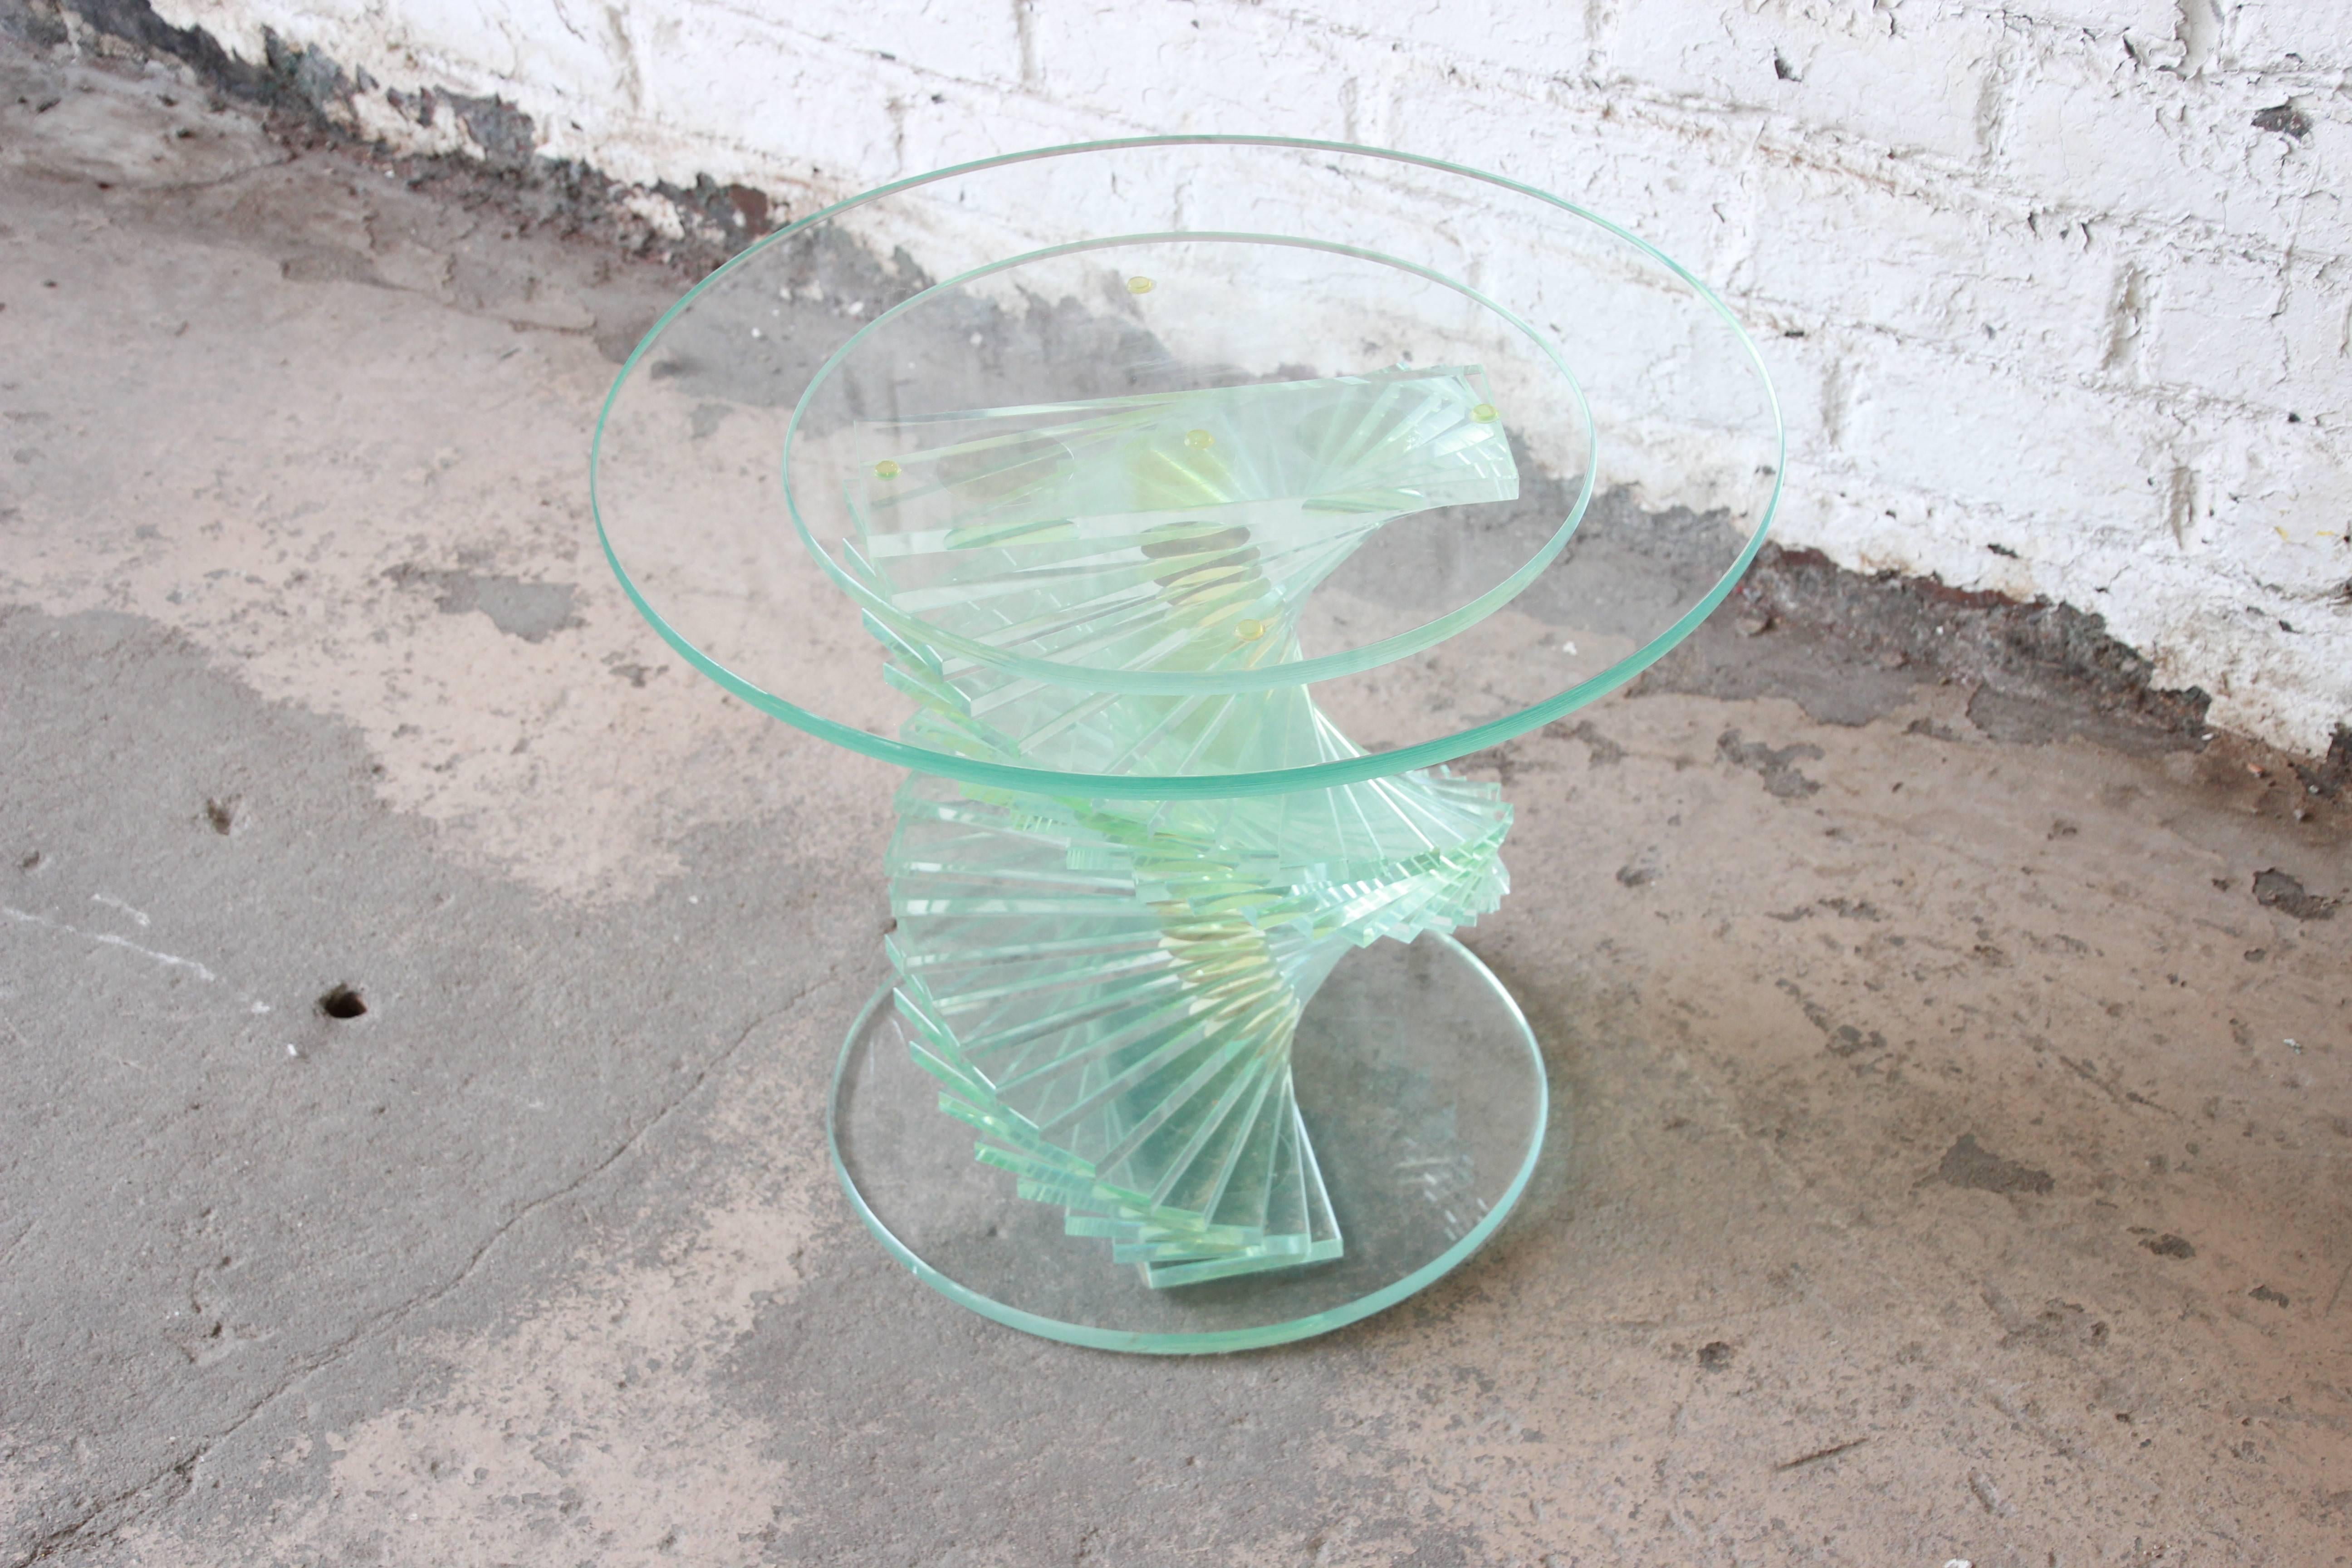 An outstanding vintage helix spiral stacked Lucite side table with a round glass top. The table features a unique helix spiral design, with stacked Lucite rectangles. A unique statement piece for any modern environment.